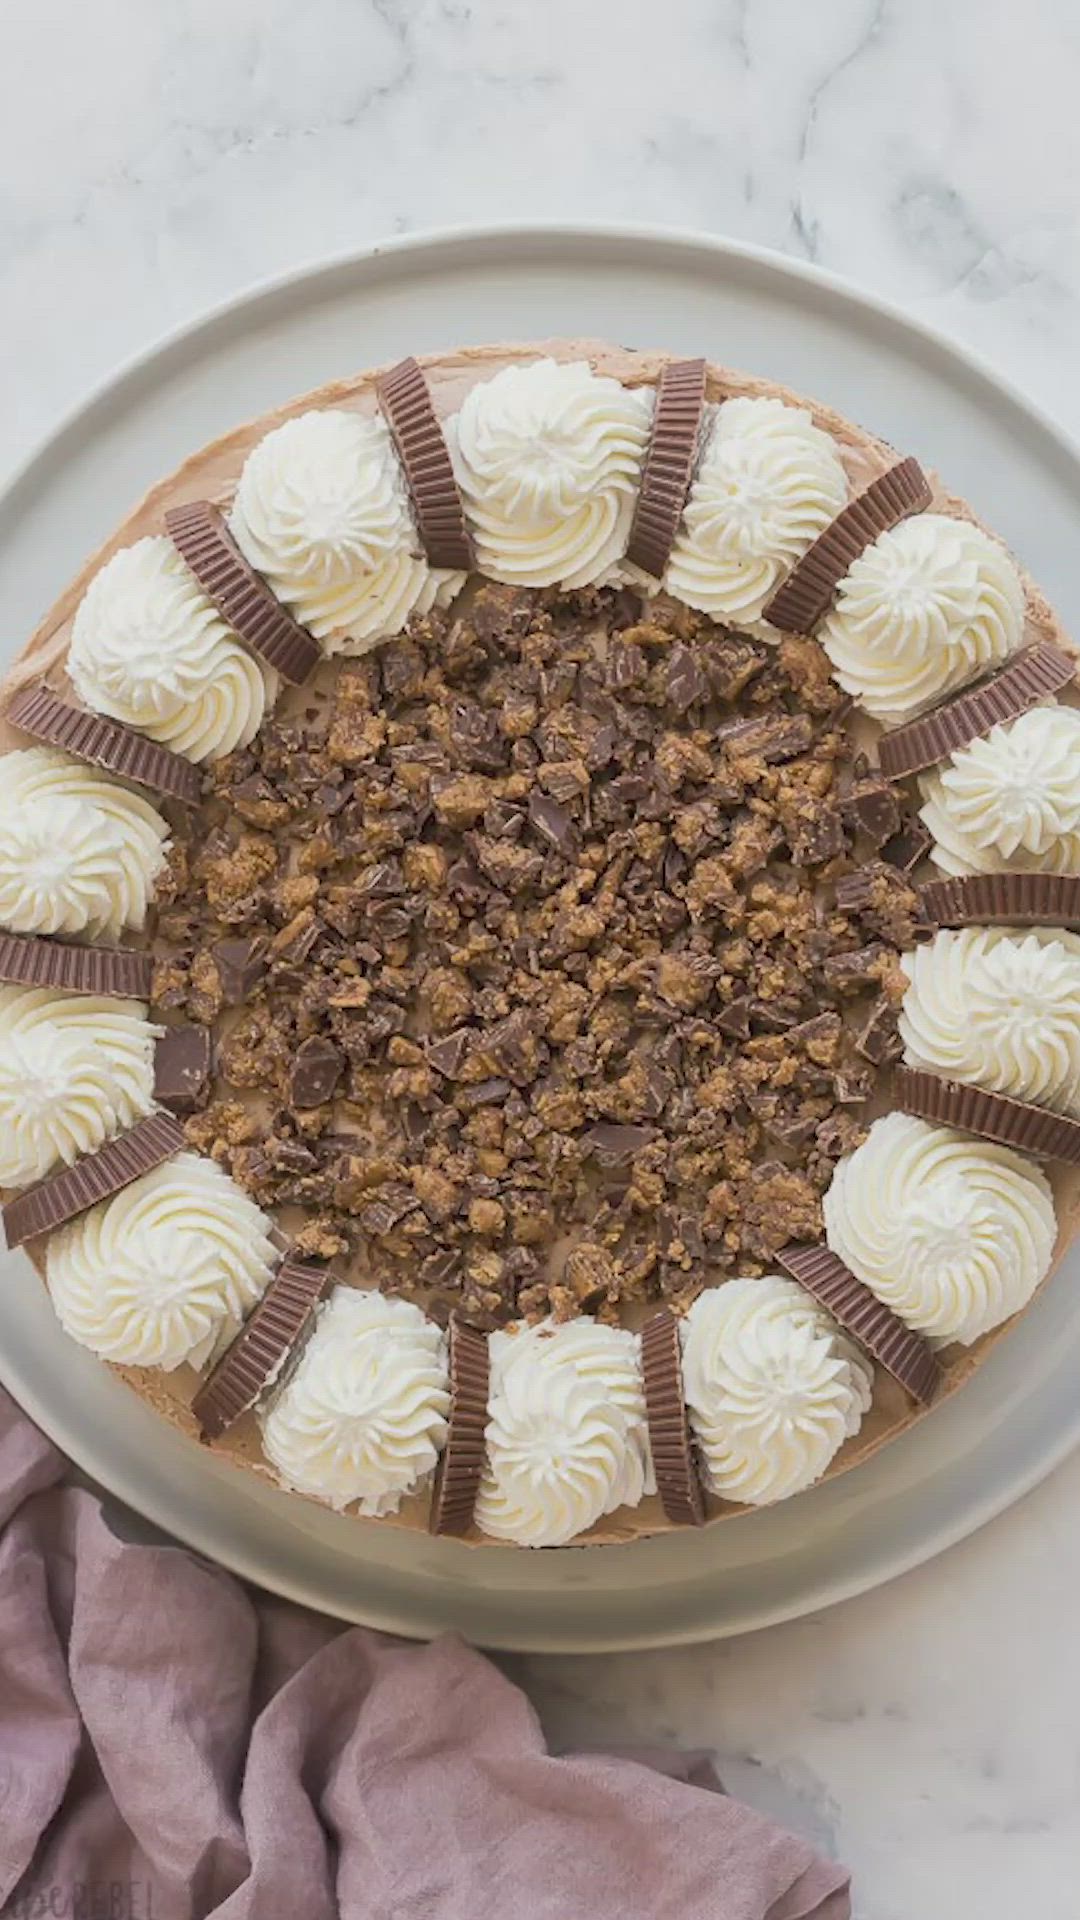 This may contain: a cake on a plate with white frosting and chocolate pieces in the top layer